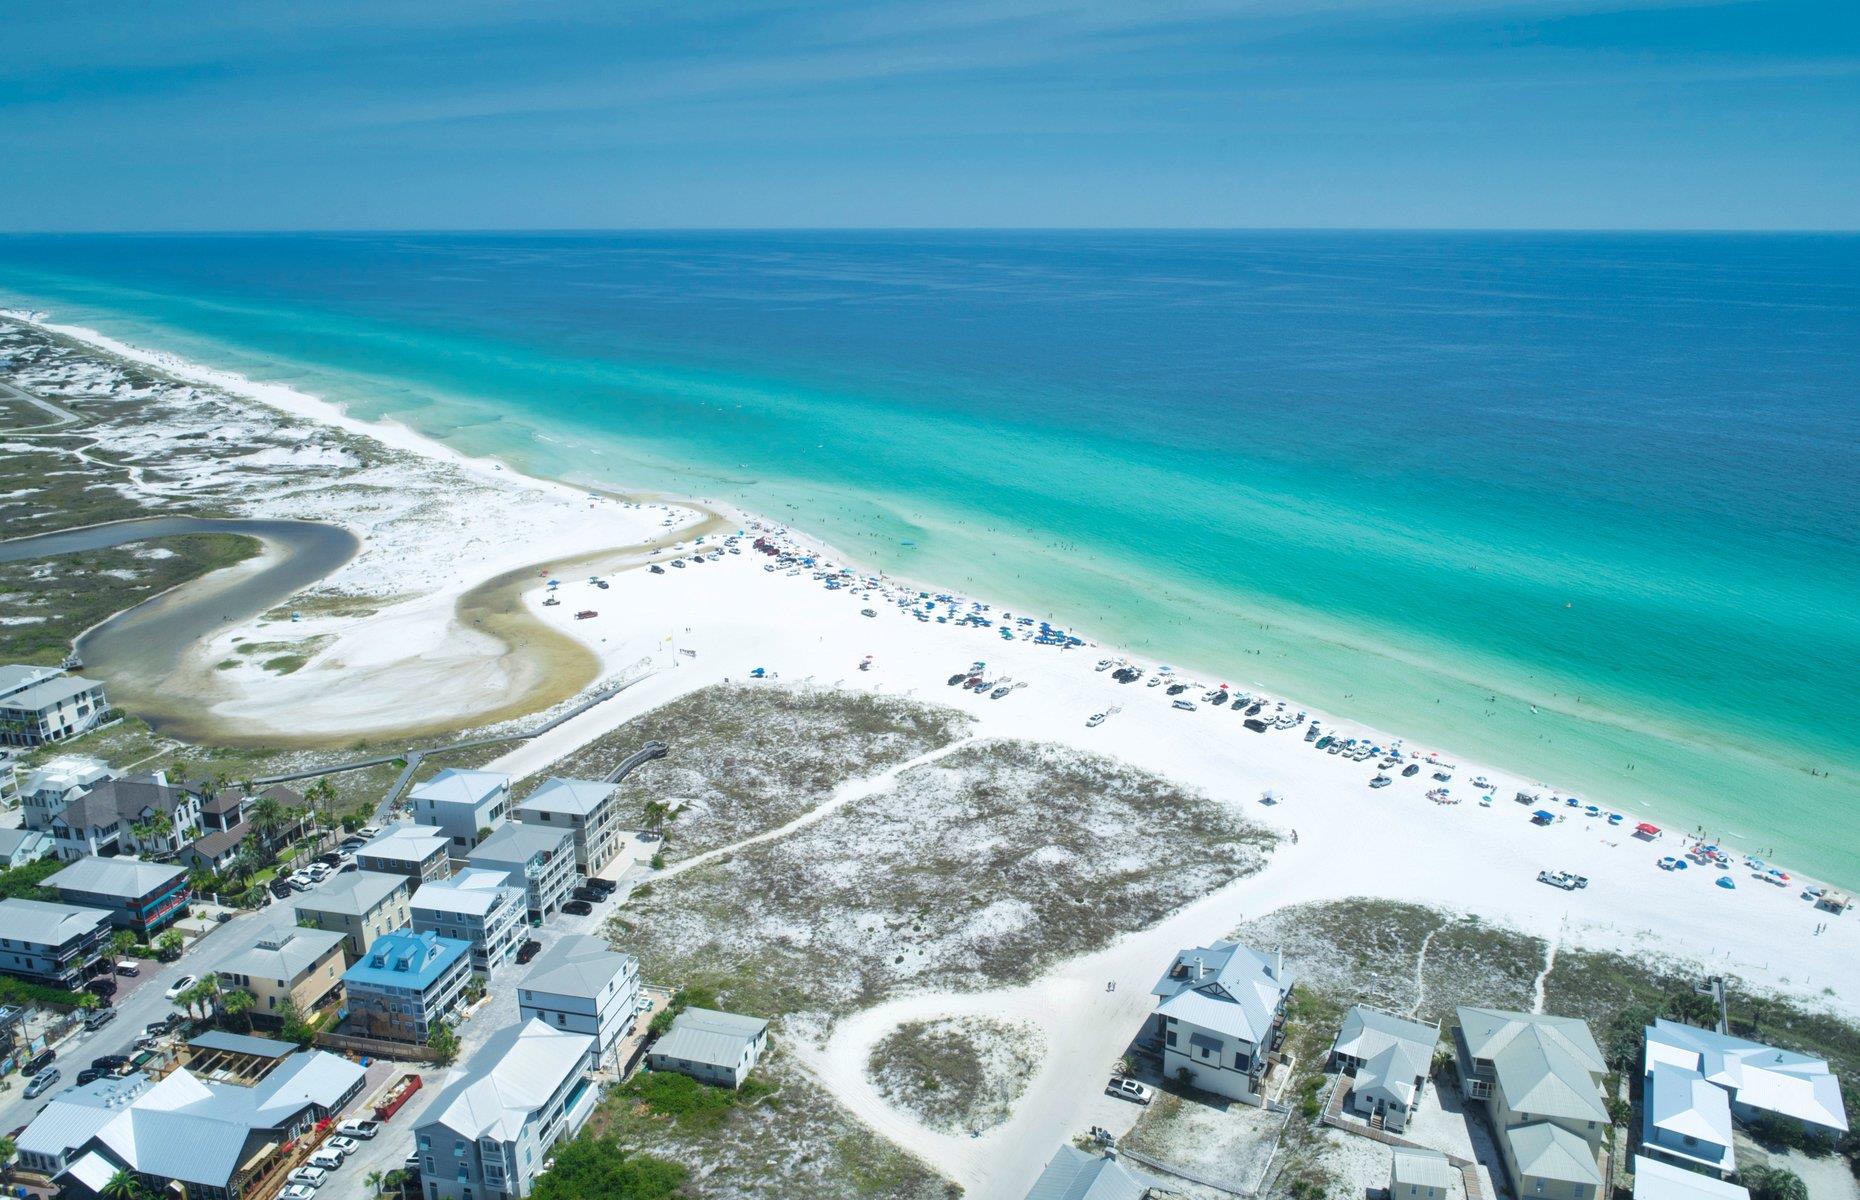 <p>Seen from the skies, Grayton Beach is a winning combination of pristine sands and almost fluorescent turquoise seas. Situated in the panhandle about halfway between Pensacola and Panama City, the town is mostly covered by the 400-acre Grayton Beach State Park, with landscapes including everything from pristine beaches to windswept forests. As well as exploring its jaw-dropping scenery, visitors can stroll through the town’s quaint white-picket-fence communities or pop into a waterfront restaurant for a taste of Southern cuisine.</p>